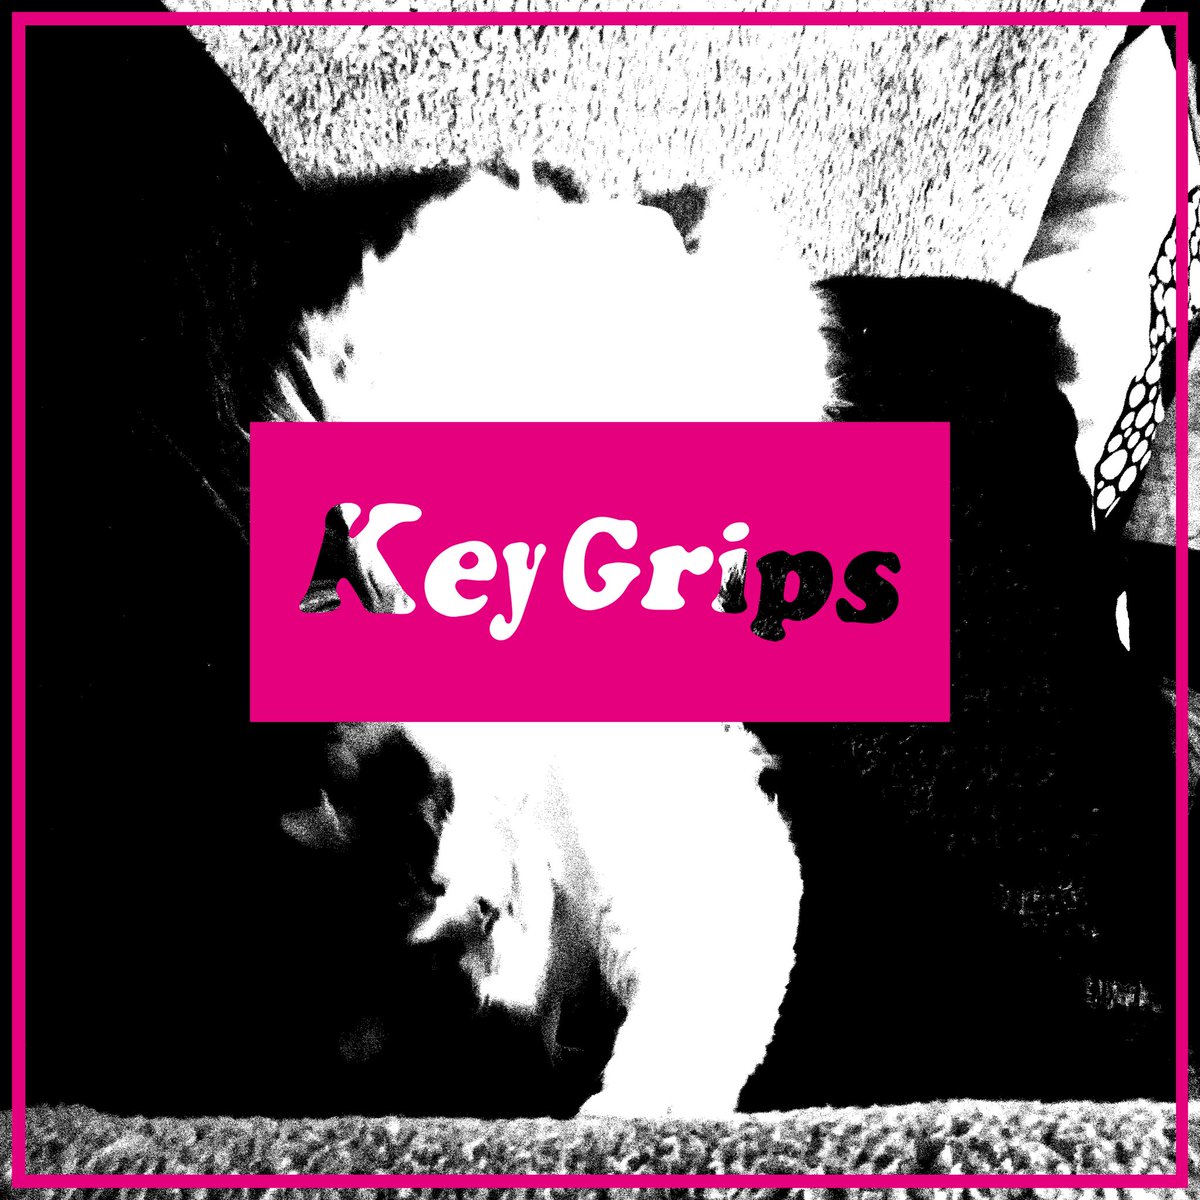 Very sick late summer episode of Key Grips goes live on @listen_camp in 20 mins! Tracks from @LucreciaDalt, @mrjamesholden (remixing XAM Duo), @thebugzoo (RIP NAZAMBA, RIP JAMIE BRANCH), Drahla feat. @duffffin, @IamRSotelo, and more! 1PM DETROIT / 6 PM UK / 7 PM CEST ✌️❤️✌️